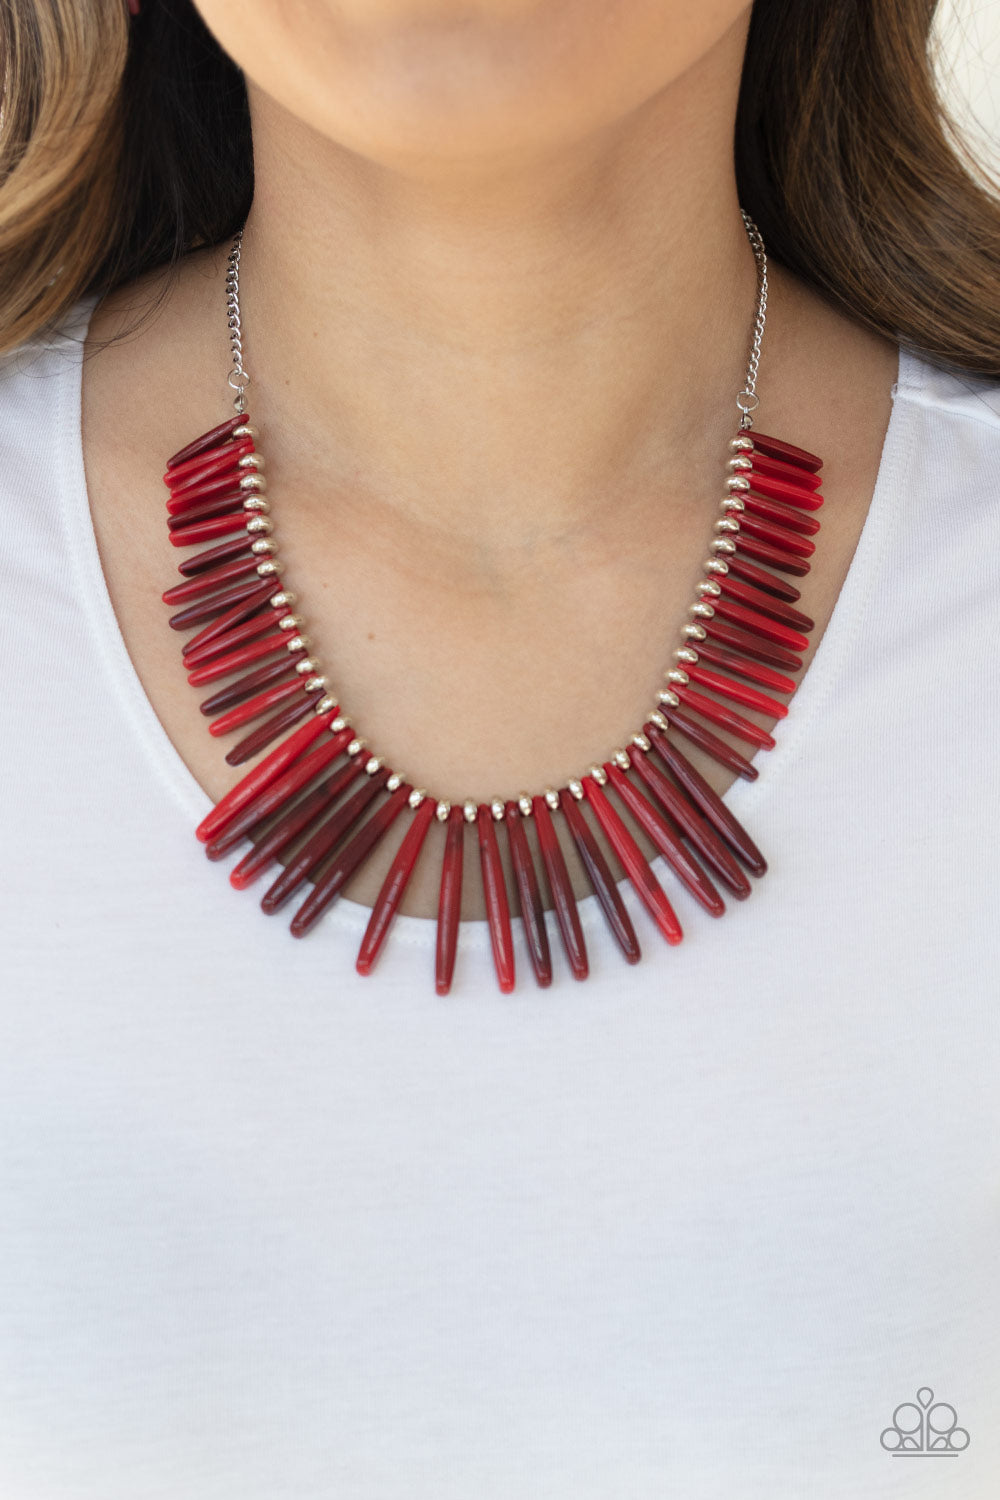 Out of My Element-Red Necklace